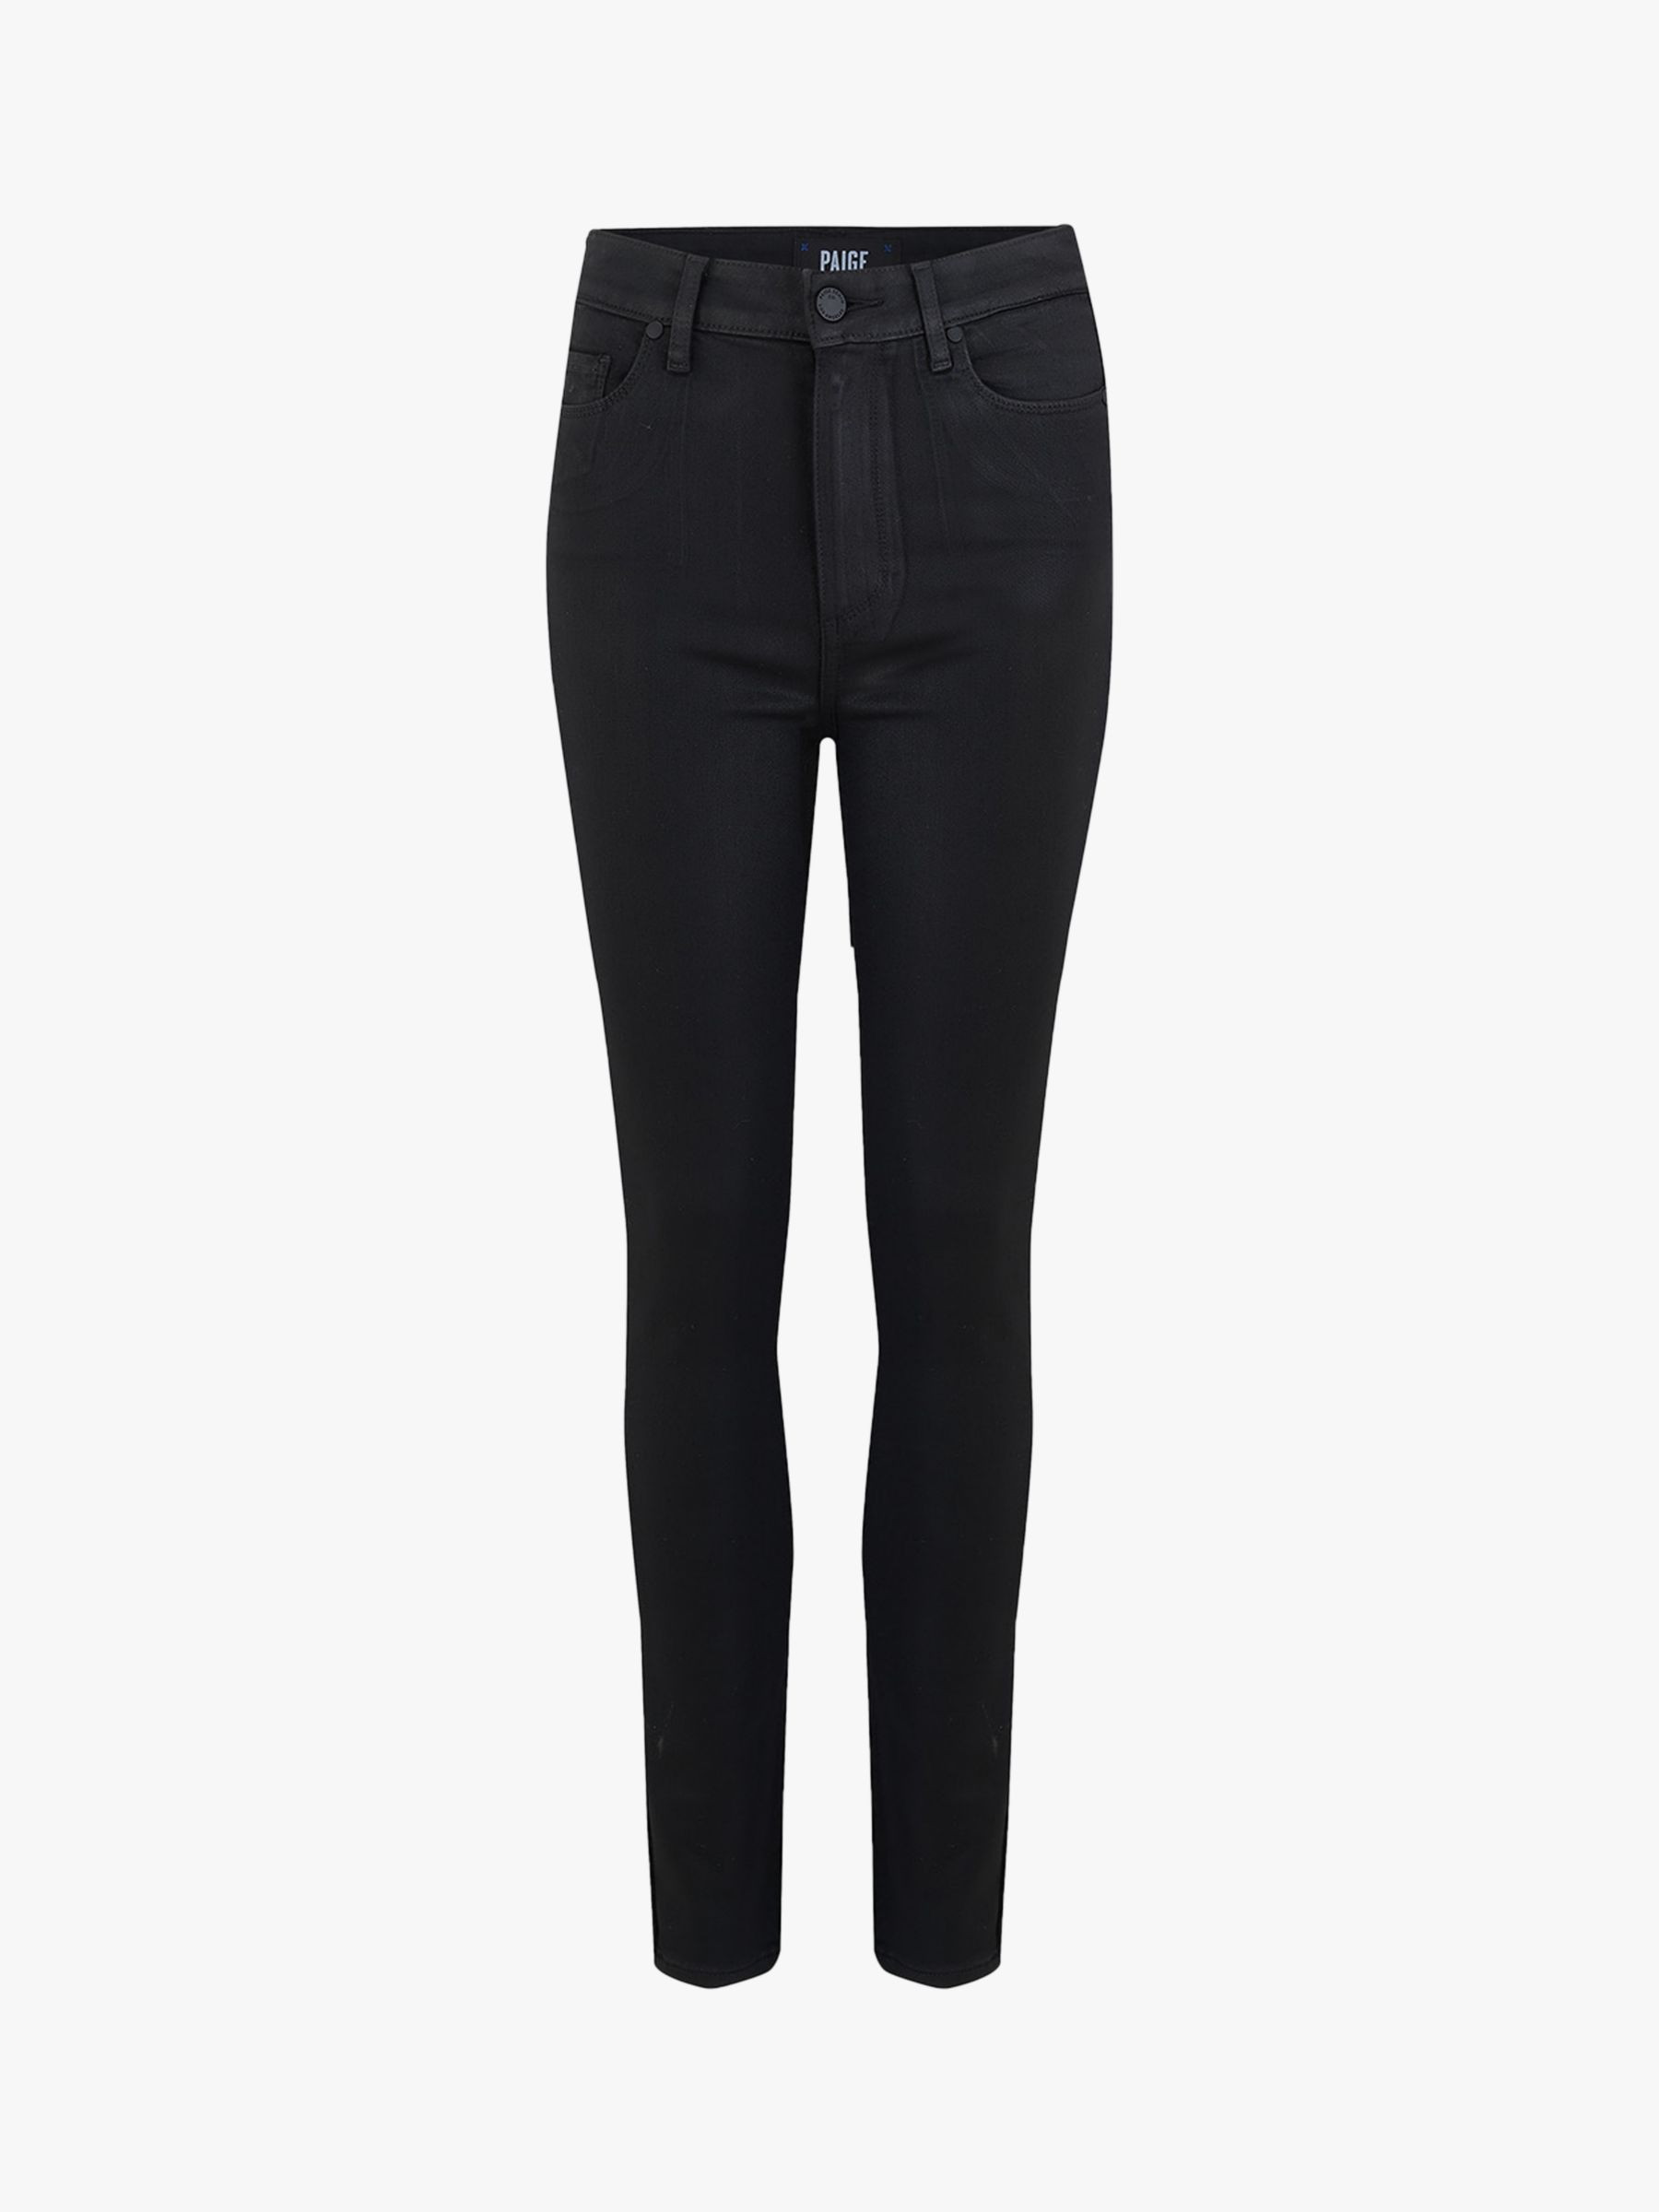 PAIGE Margot High Rise Ultra Skinny Jeans